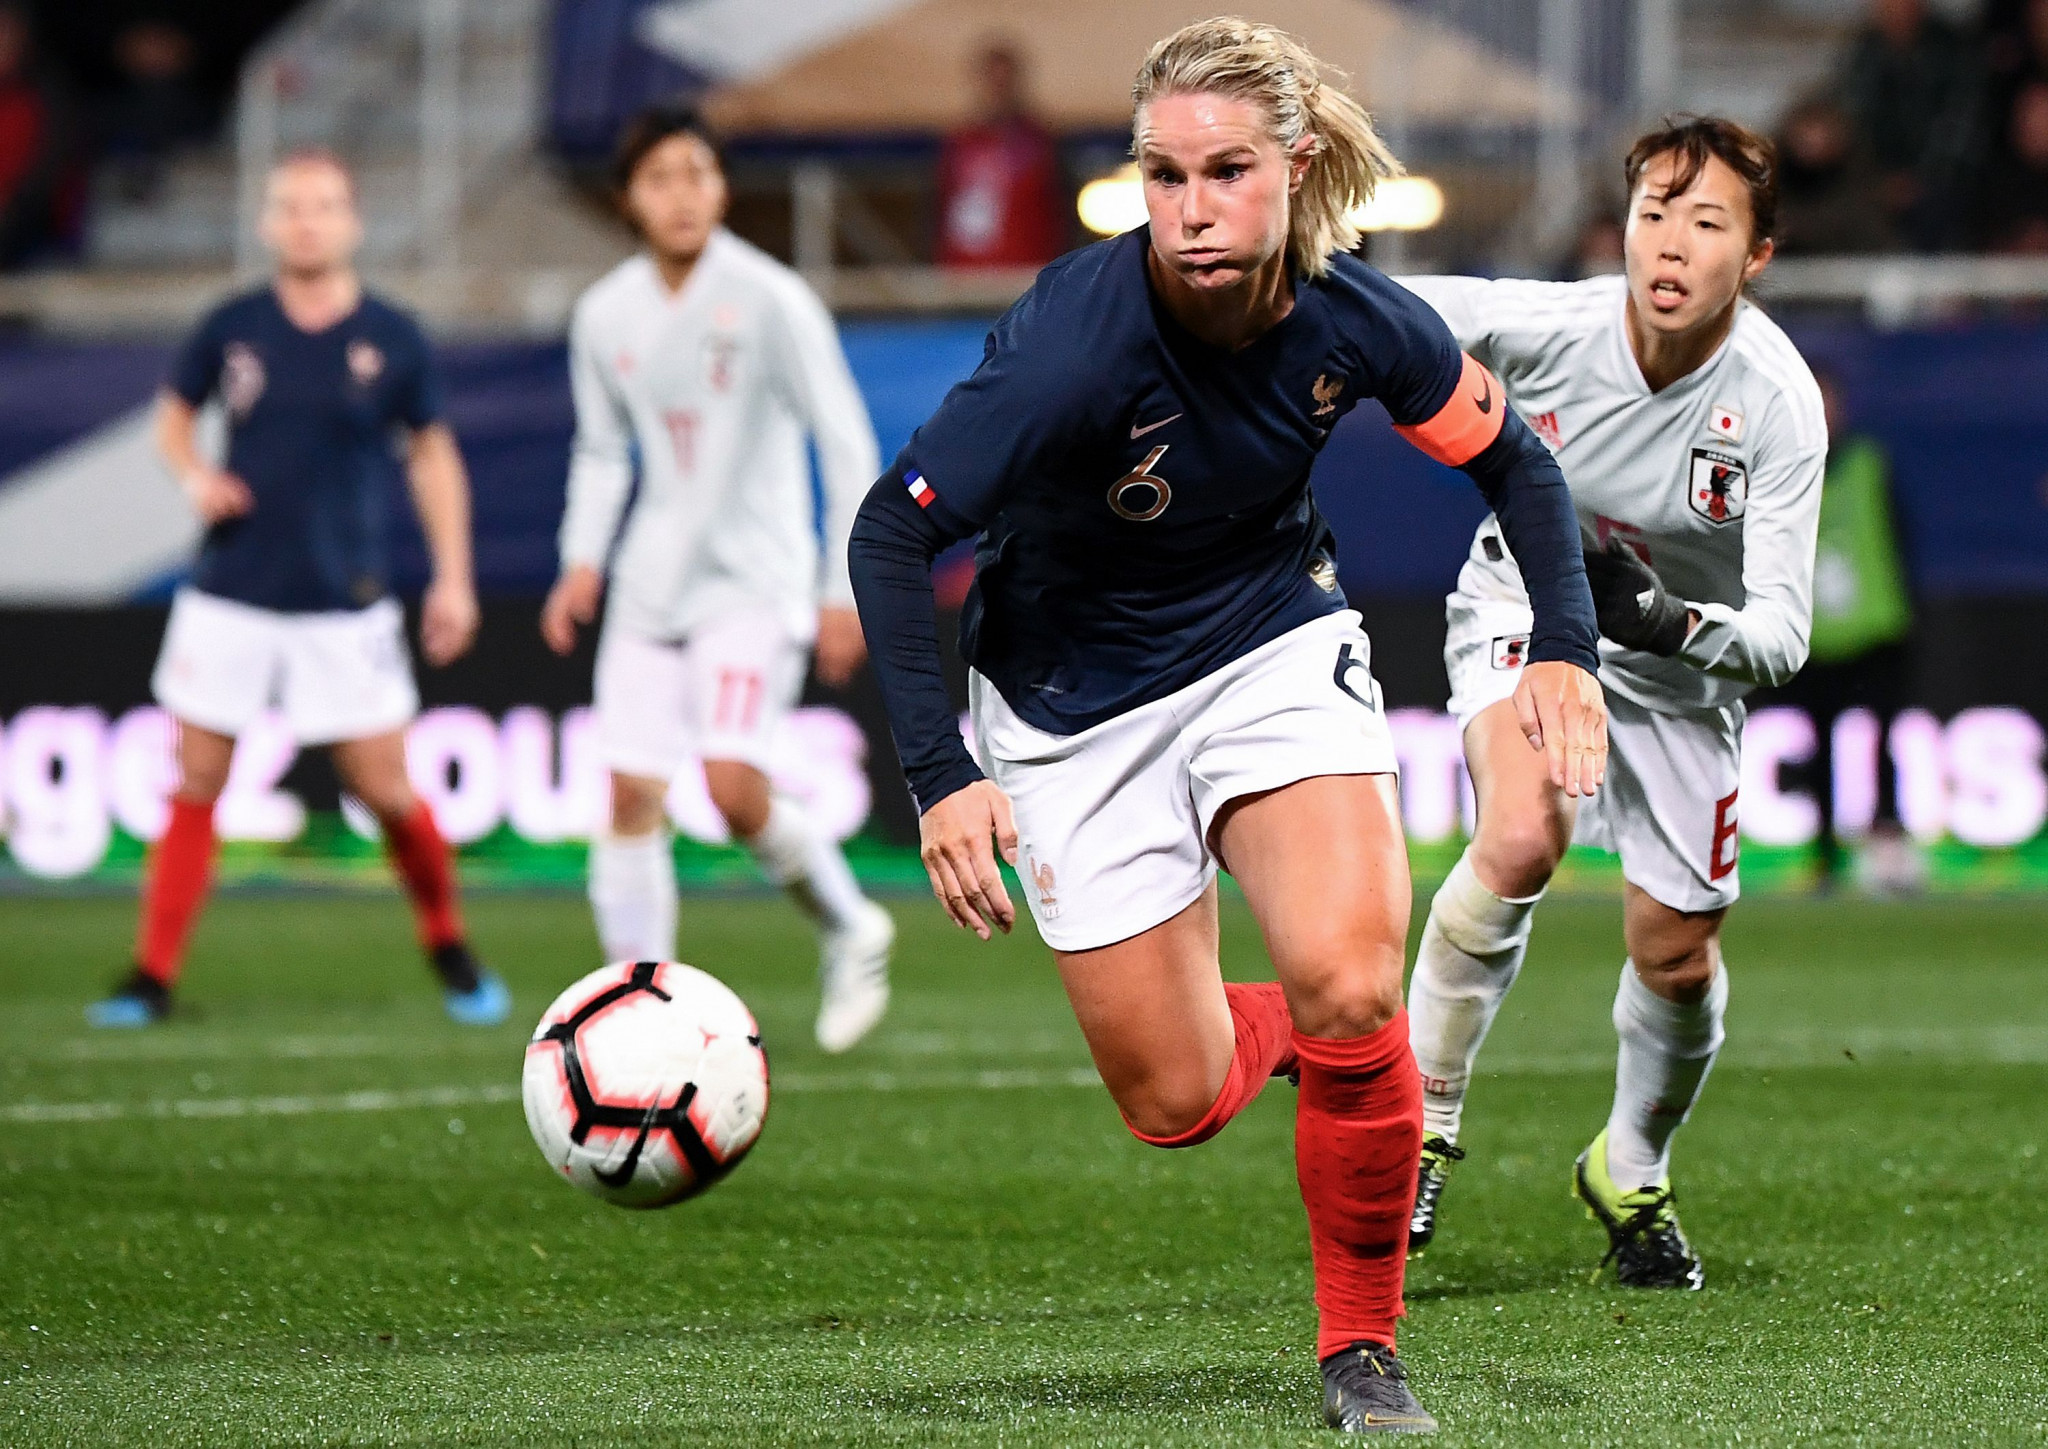 David Owen: Women's sport is on the way up – and the FIFA Women's World Cup will play its part in the rise